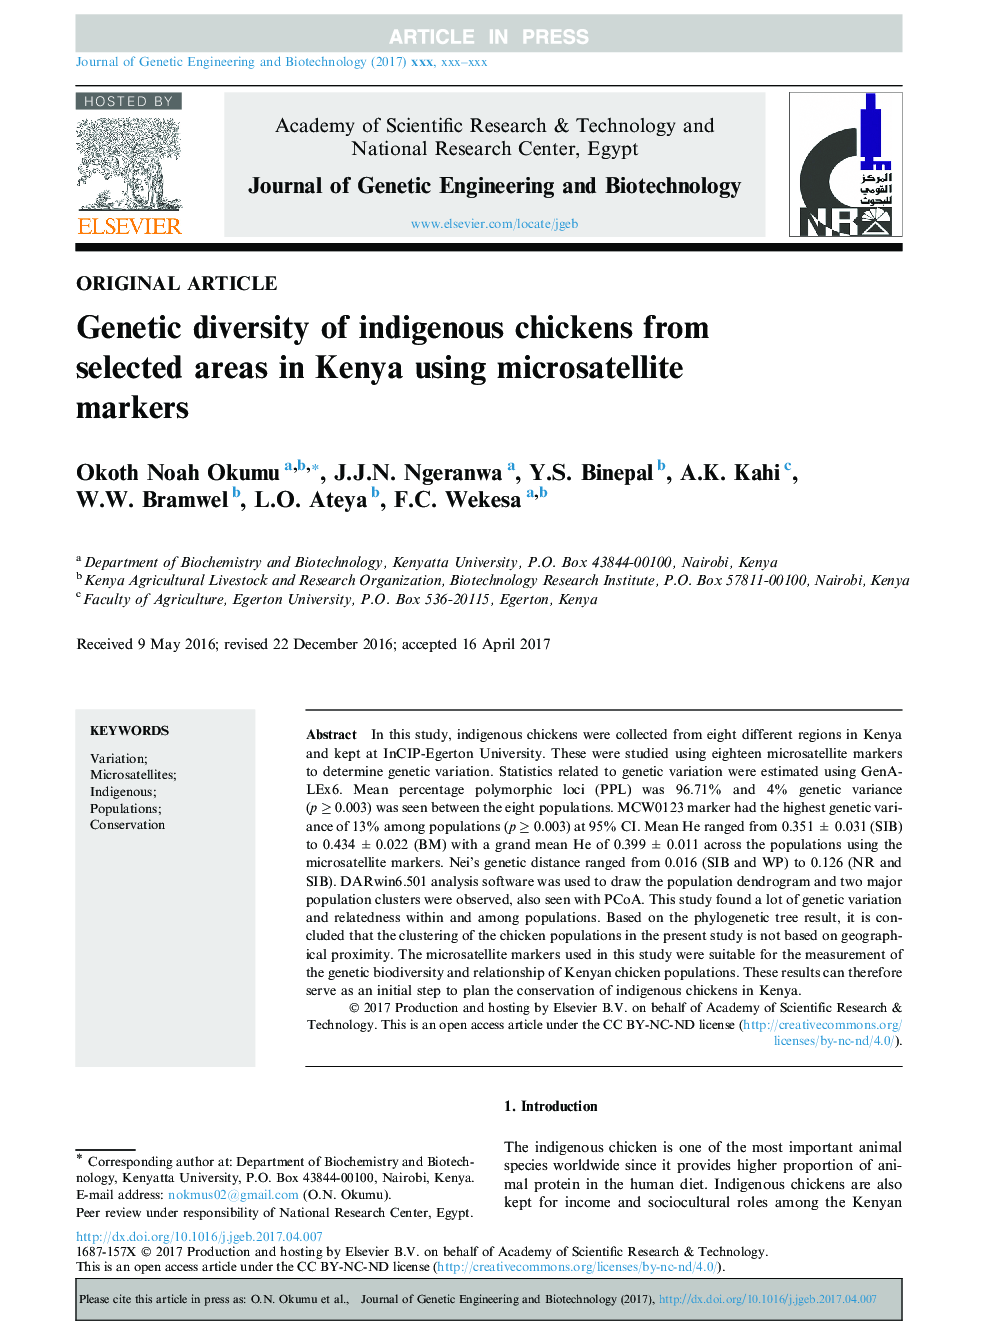 Genetic diversity of indigenous chickens from selected areas in Kenya using microsatellite markers